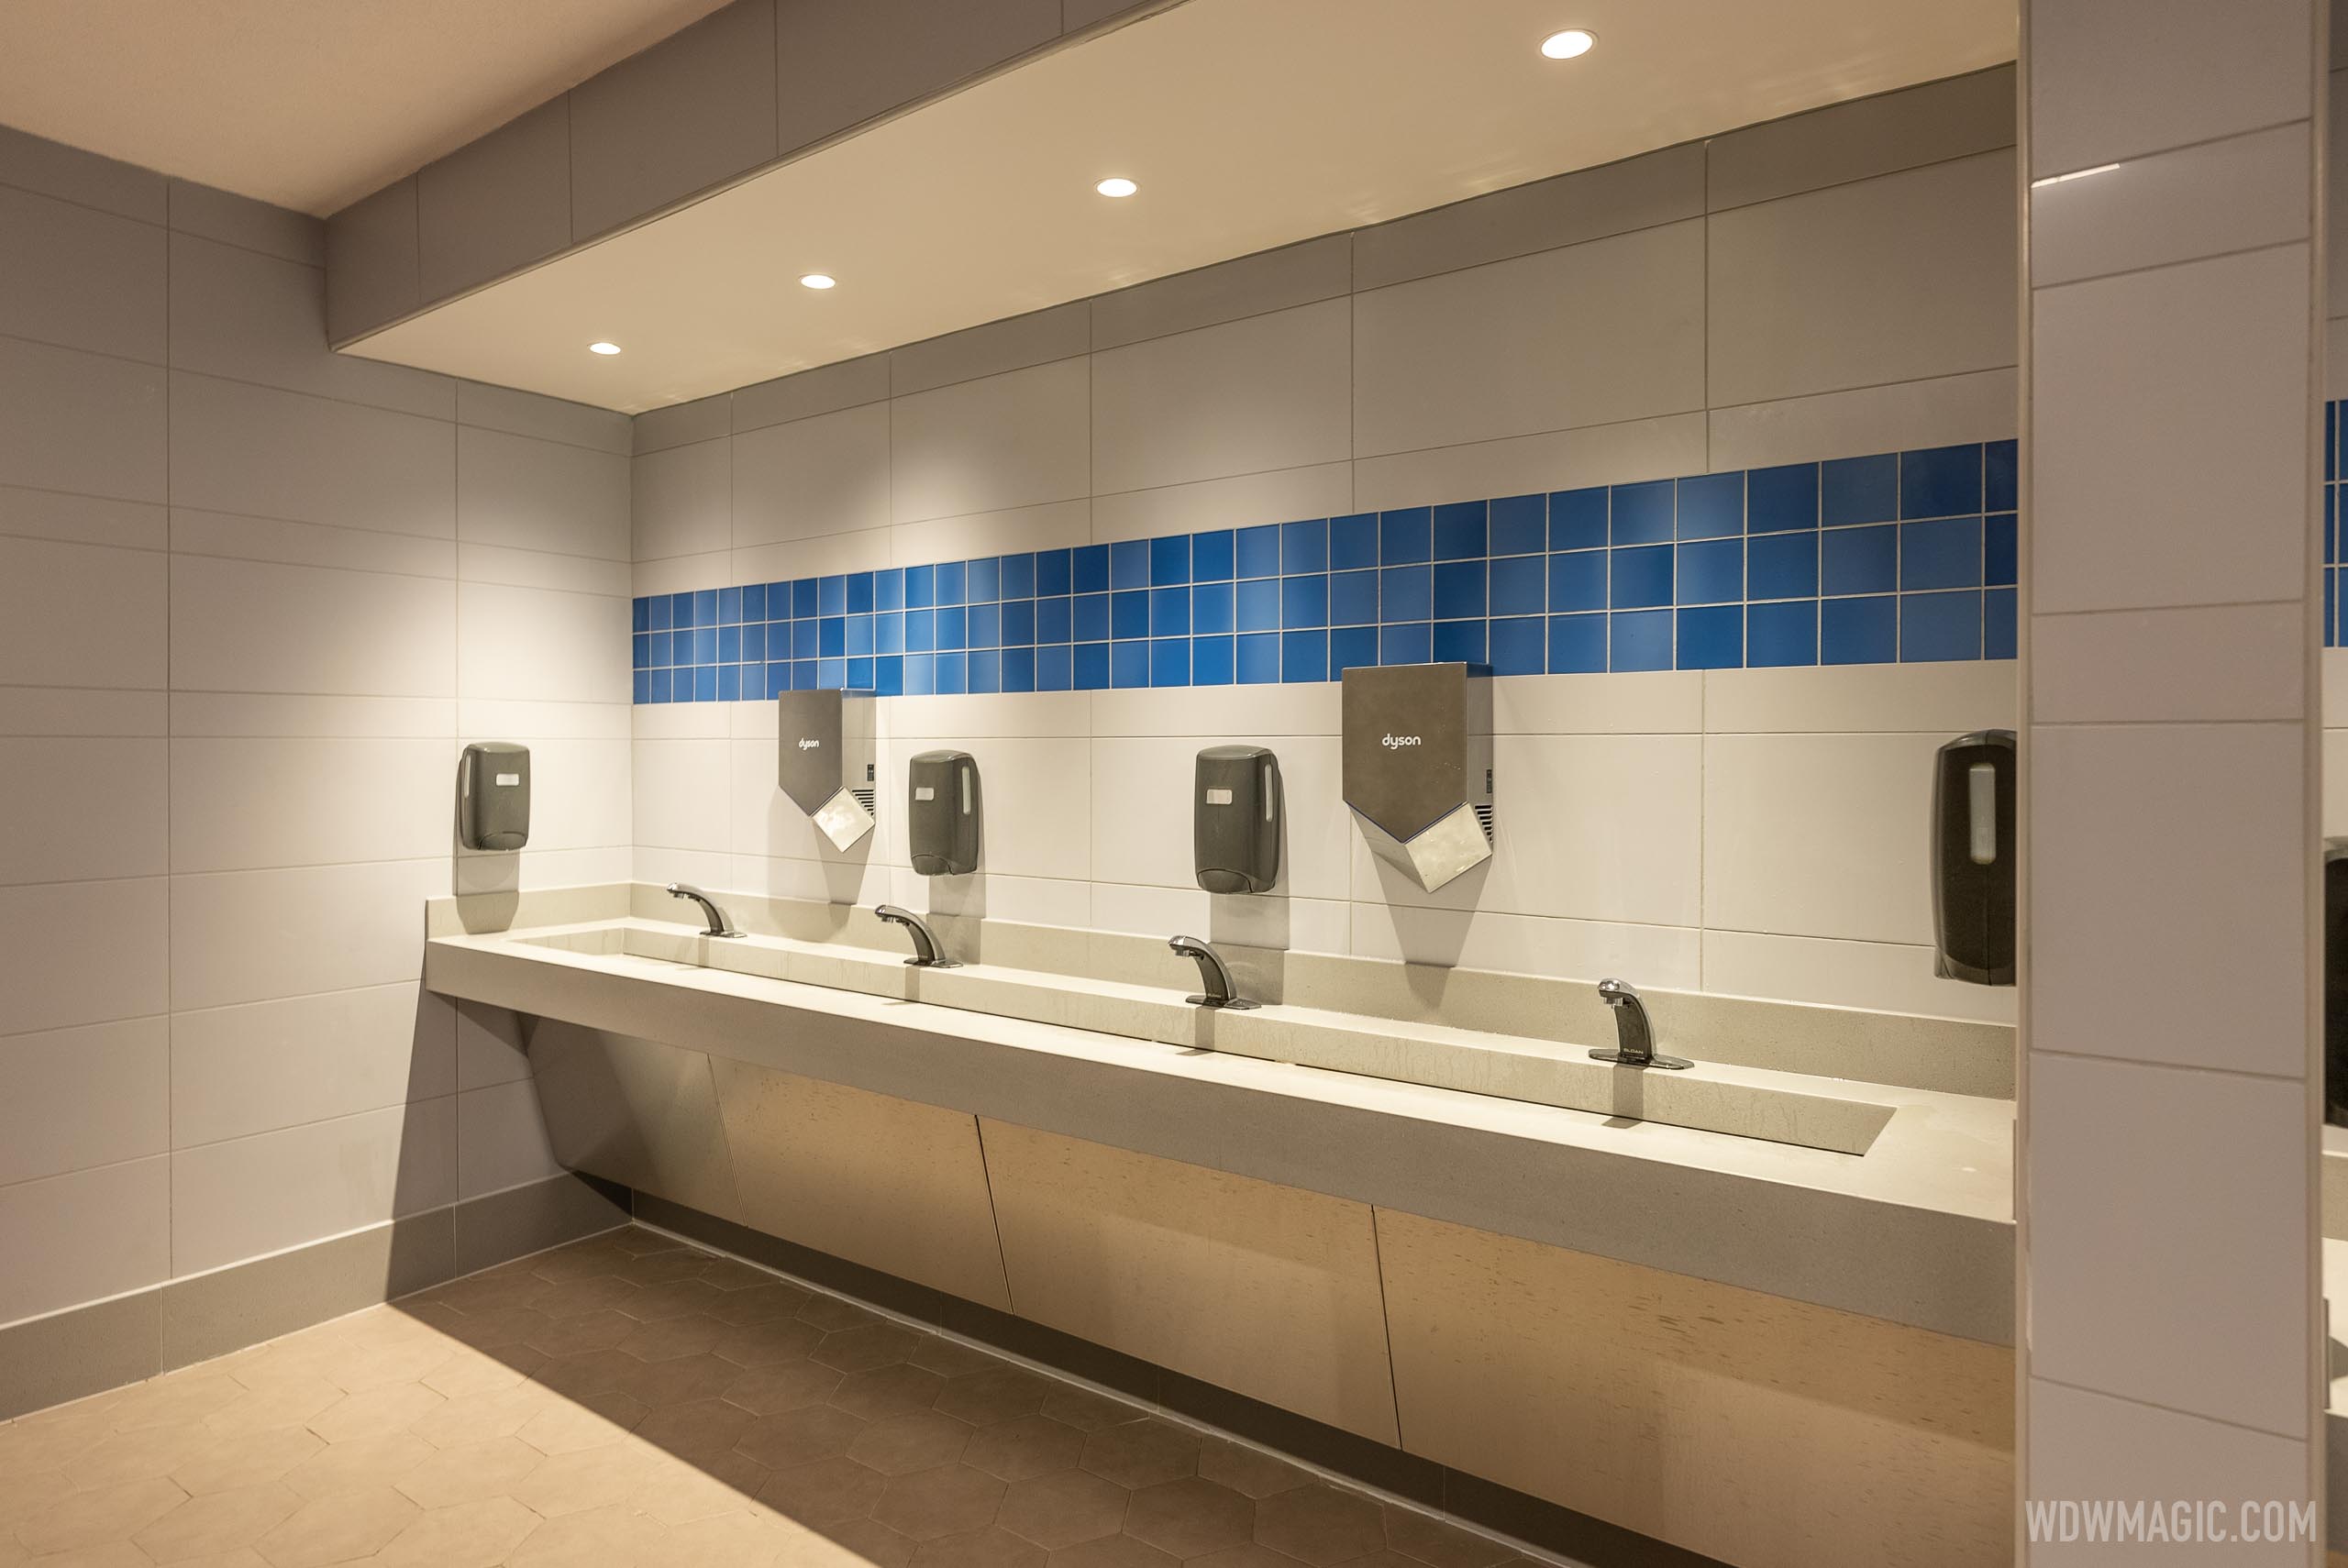 Future World East restrooms beneath Spaceship Earth reopen from refurbishment